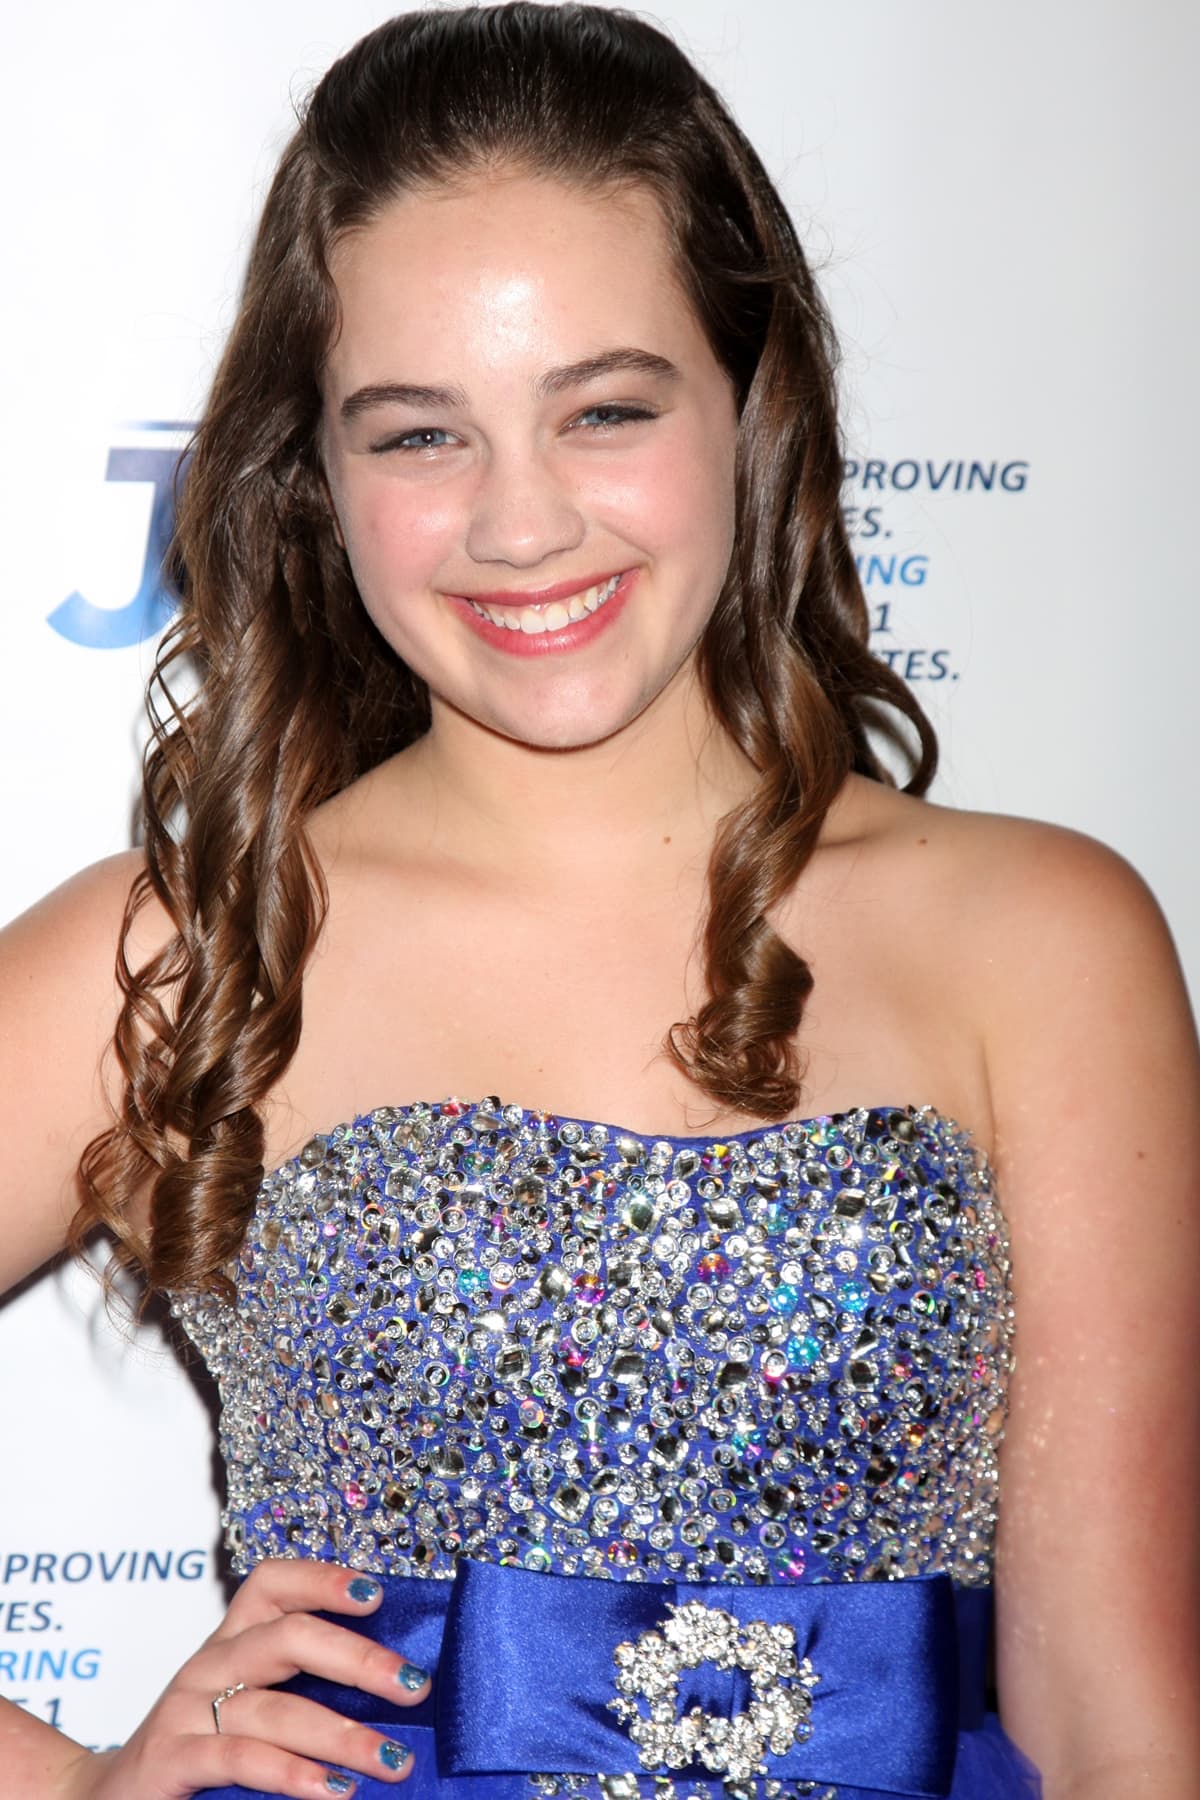 Frenemies star Mary Mouser is best known for her role as Samantha LaRusso in the Netflix series Cobra Kai